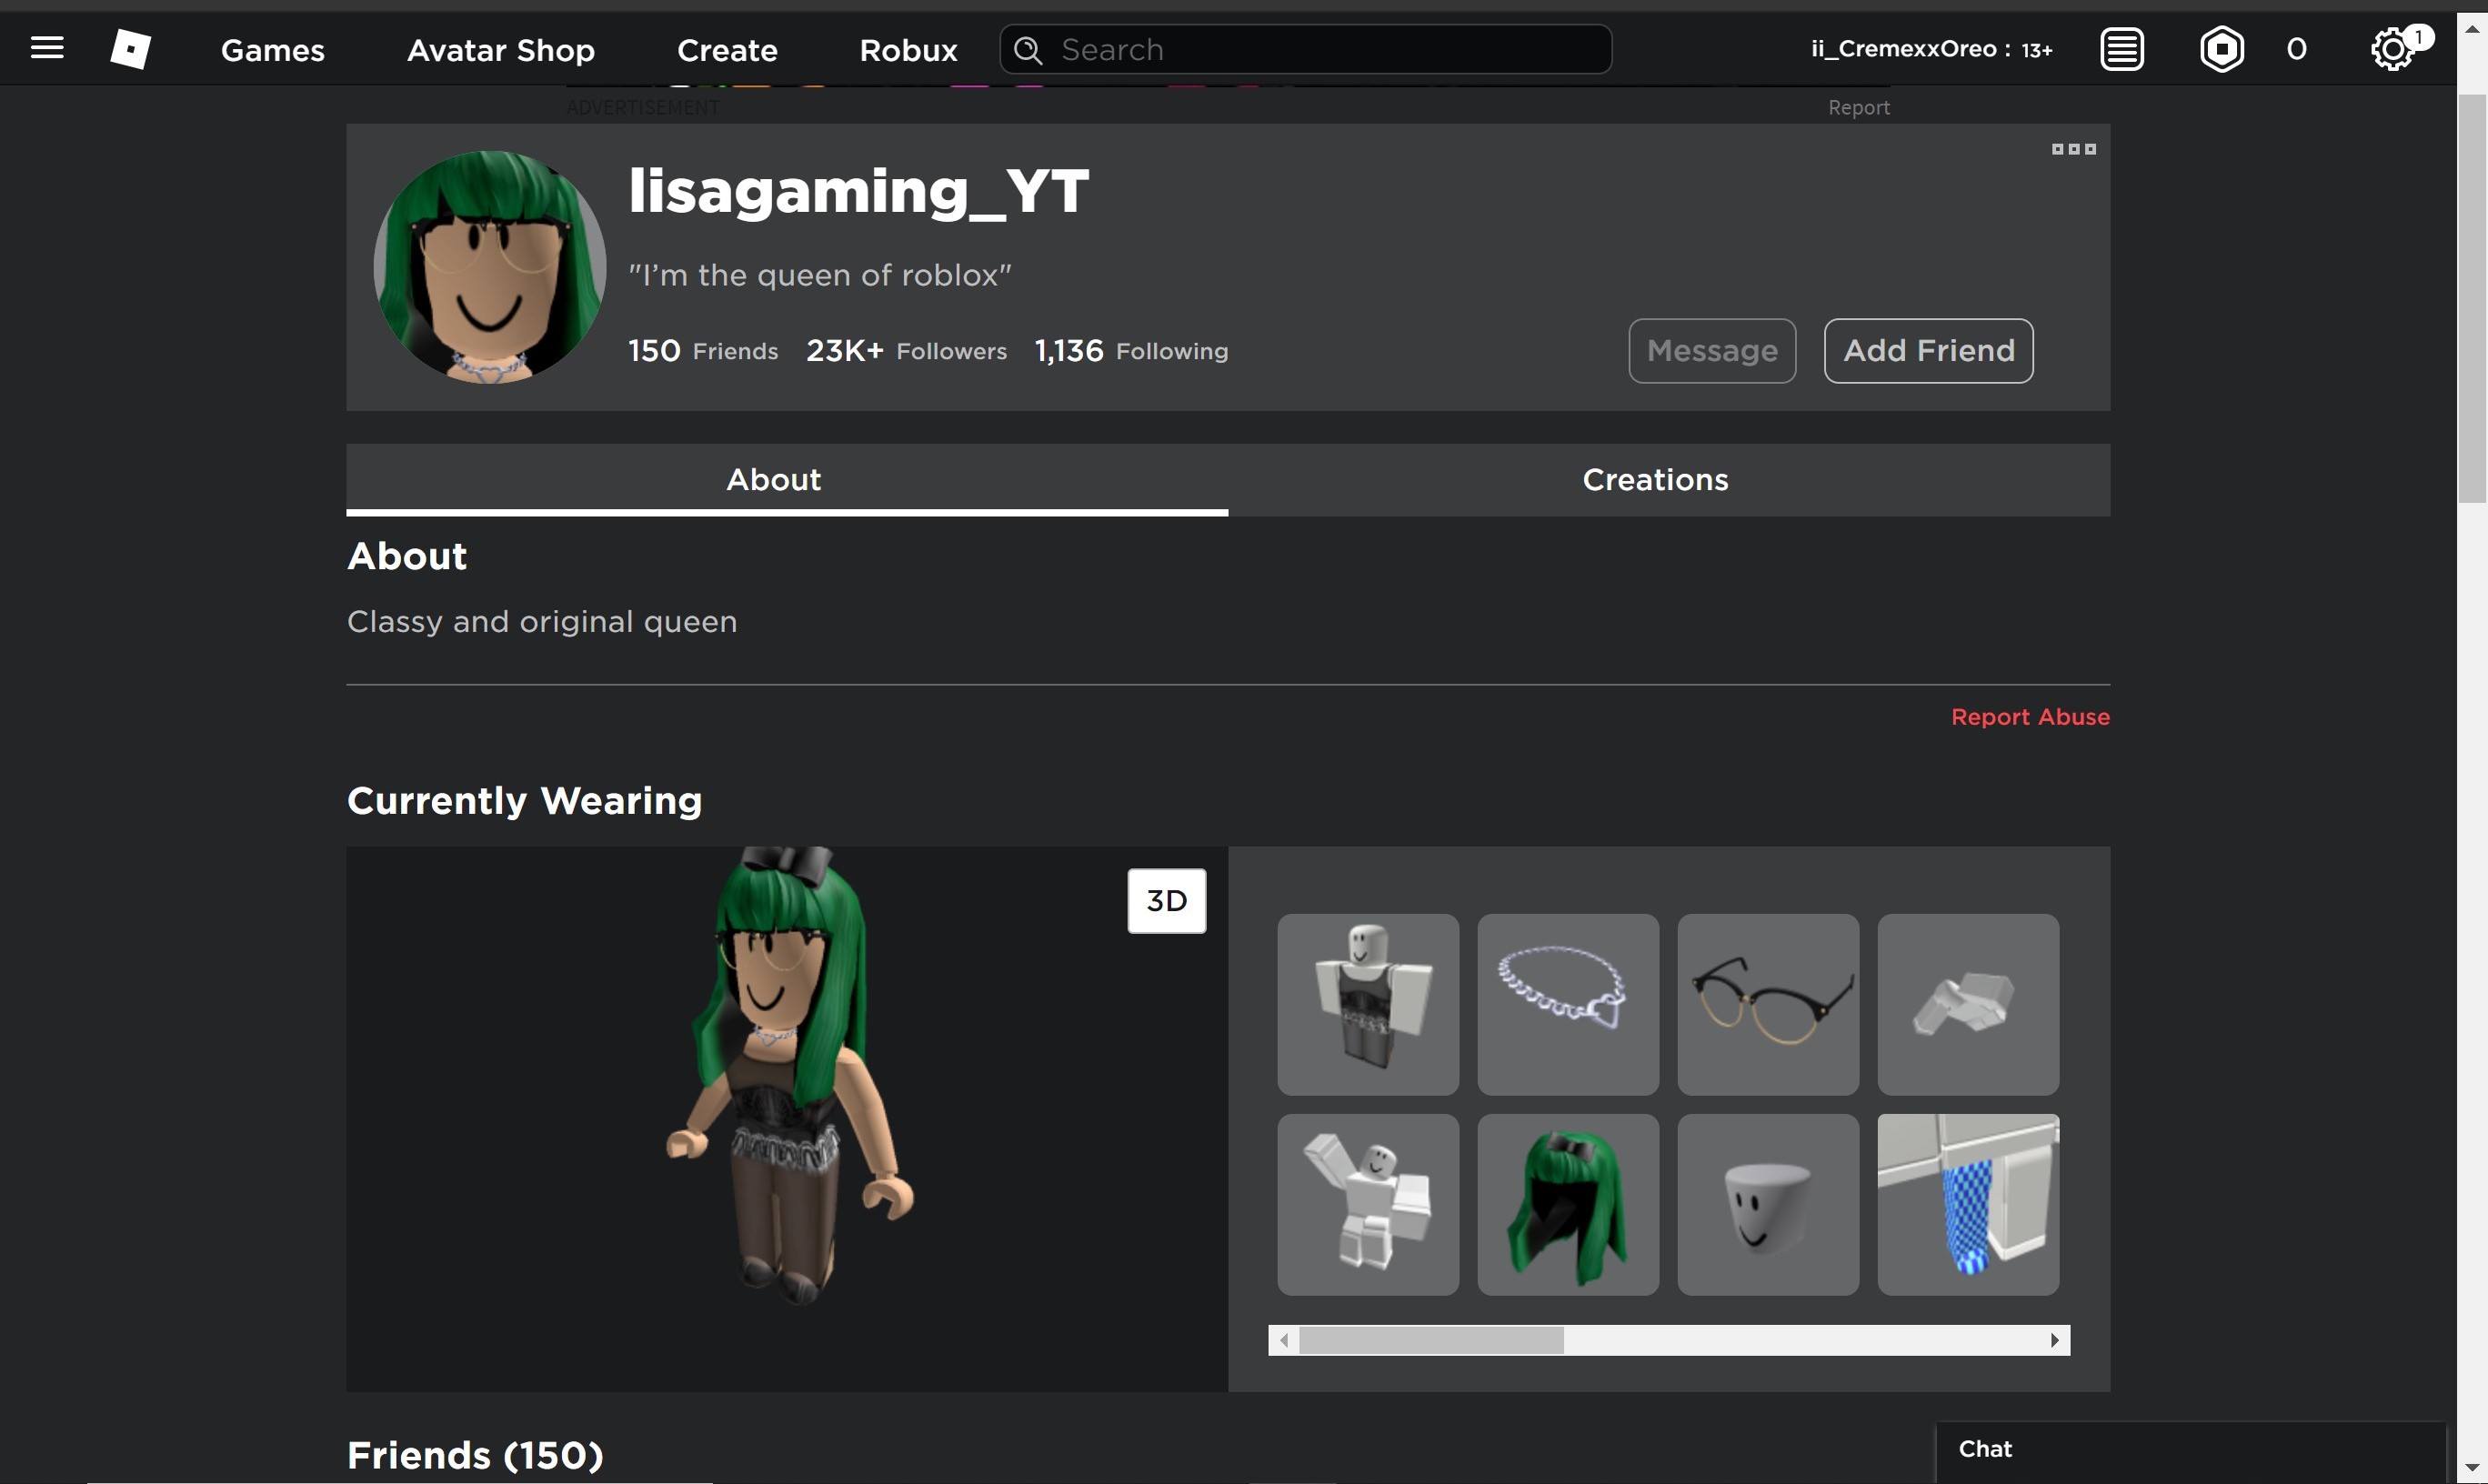 is it just me or is lisa gaming roblox just painfully cringe | Fandom